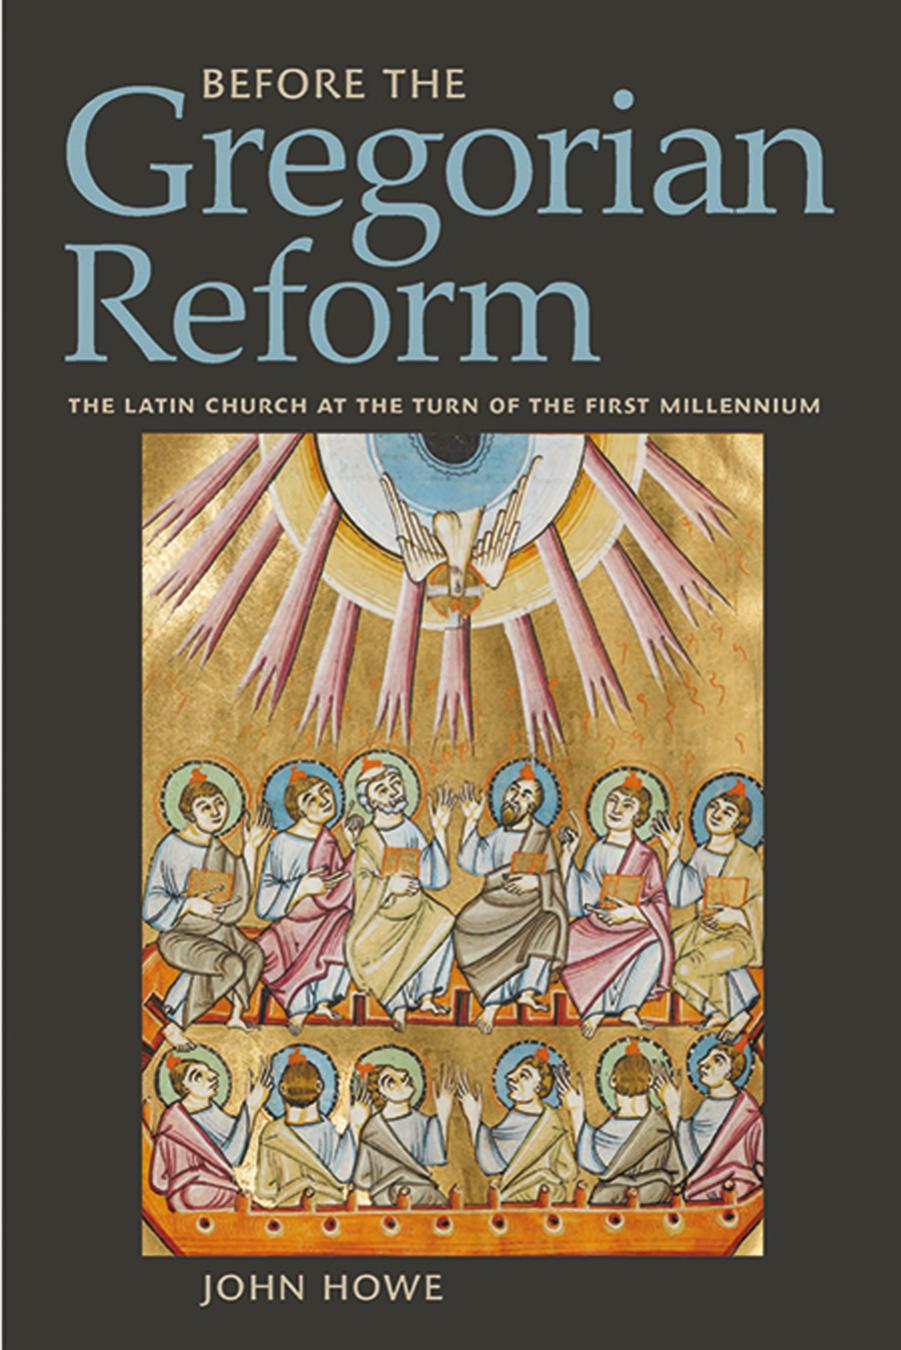 Before the Gregorian Reform: The Latin Church at the Turn of the First Millennium by by John Howe